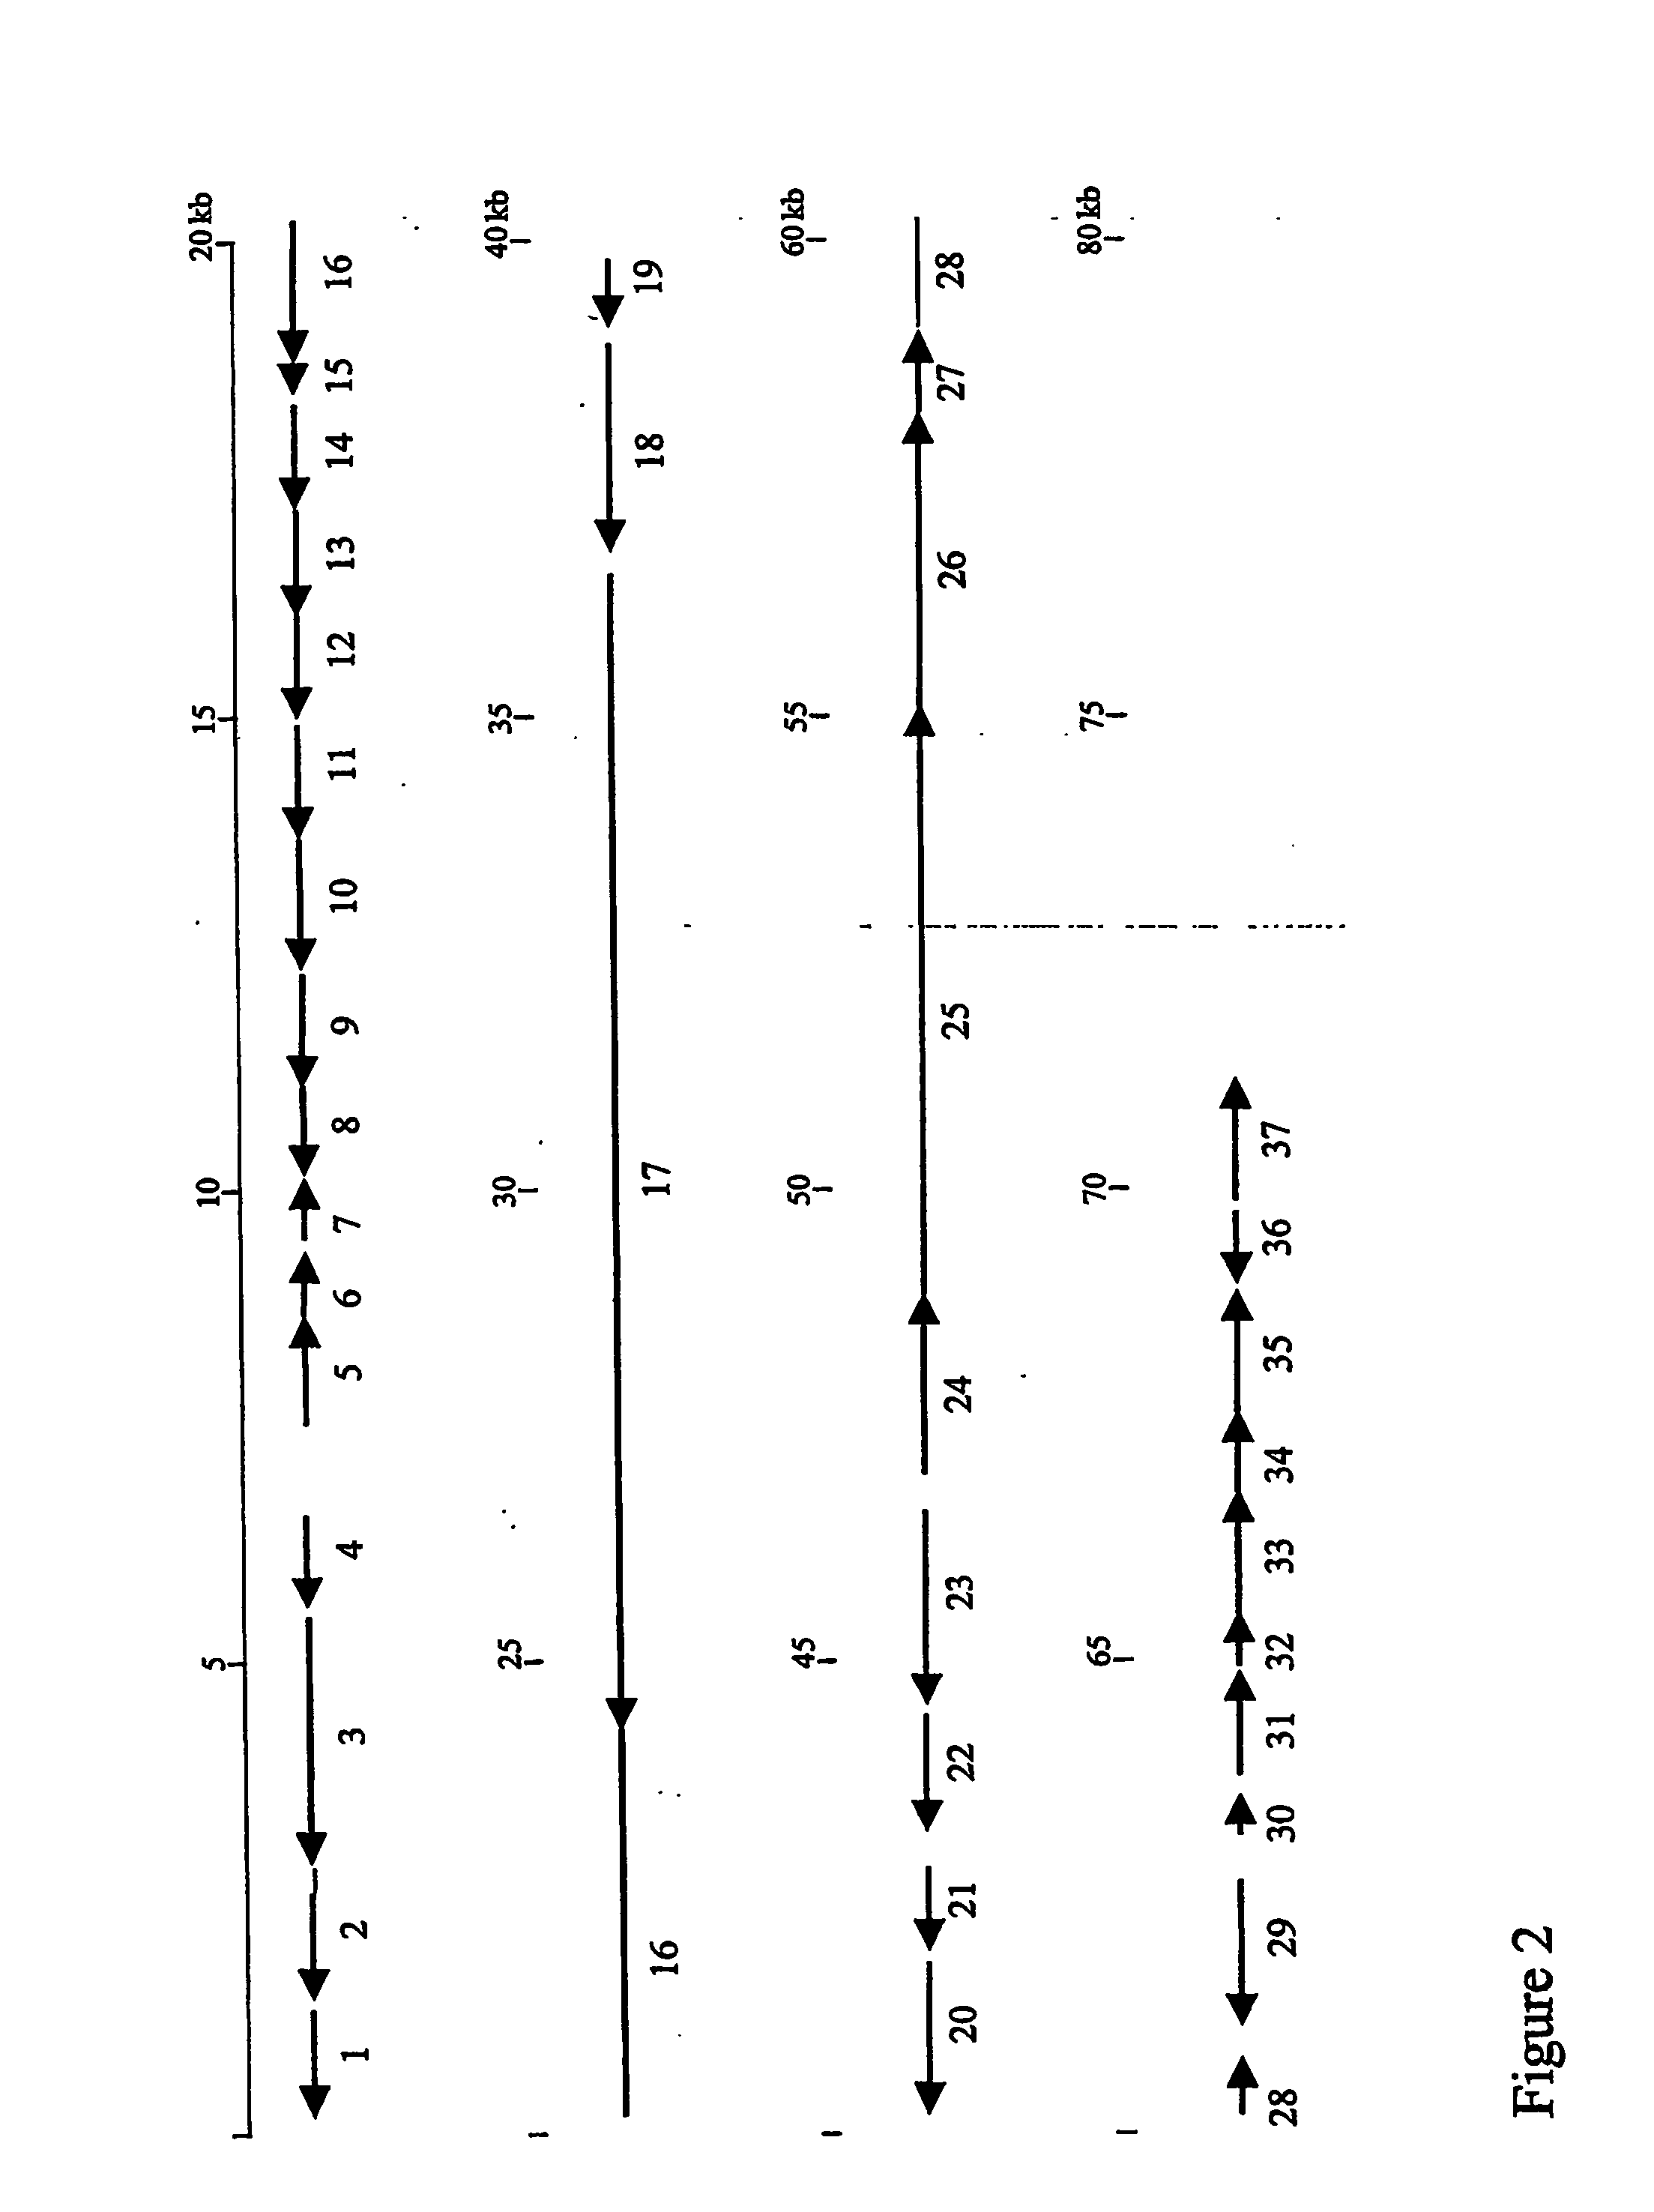 Genes and Proteins For the Biosynthesis of the Glycopeptide Antibiotic A40926